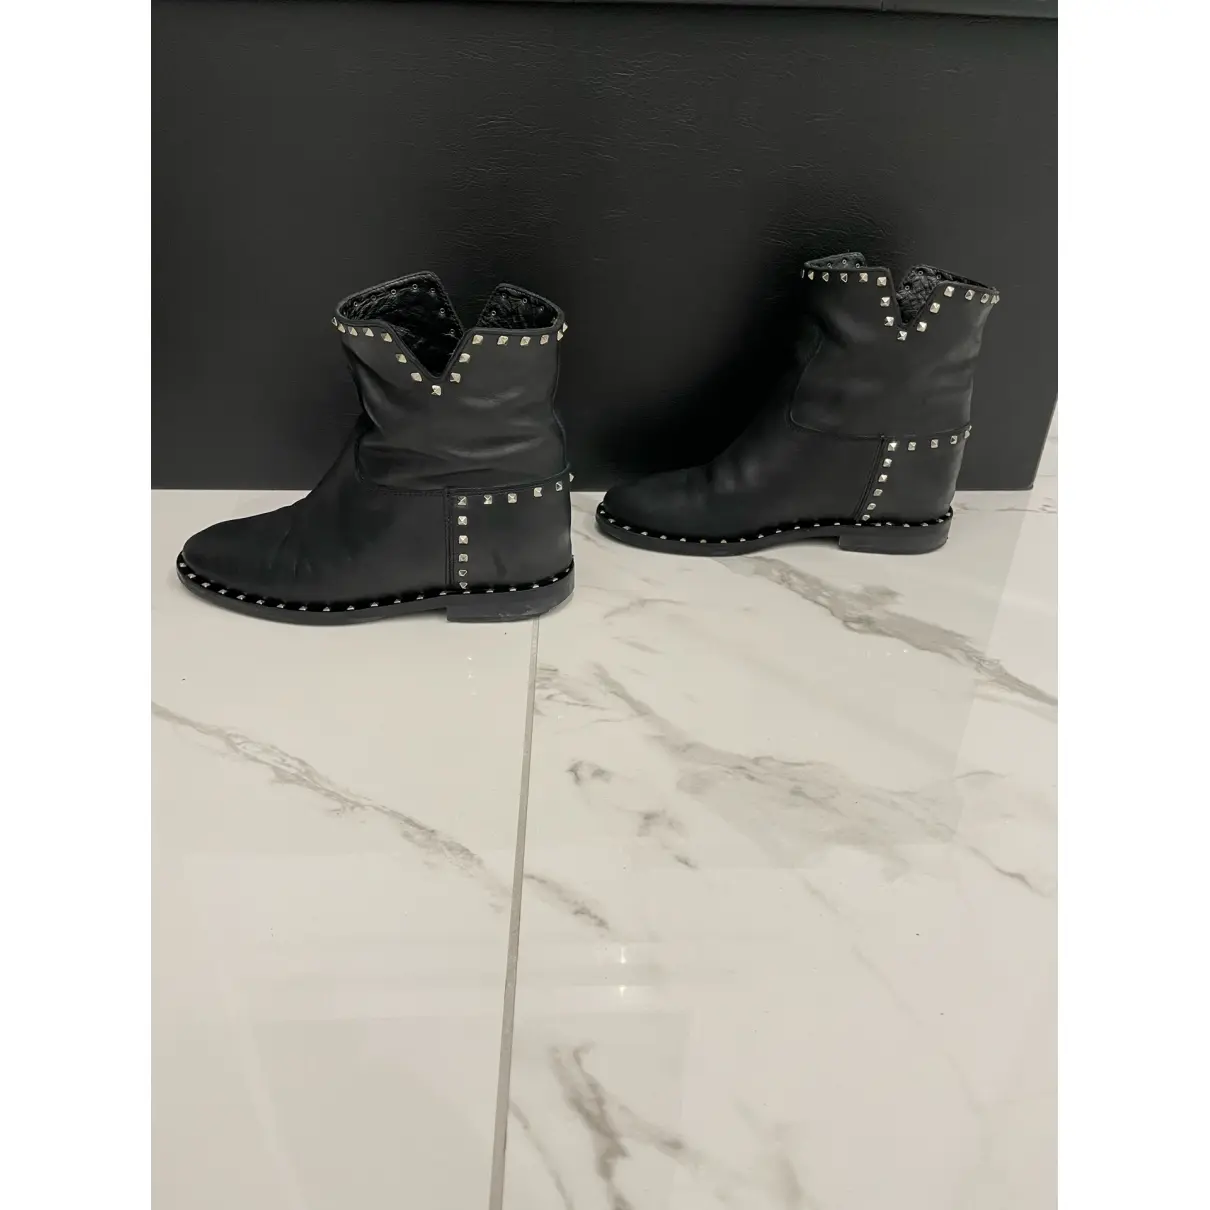 Buy Via Roma xv Leather ankle boots online